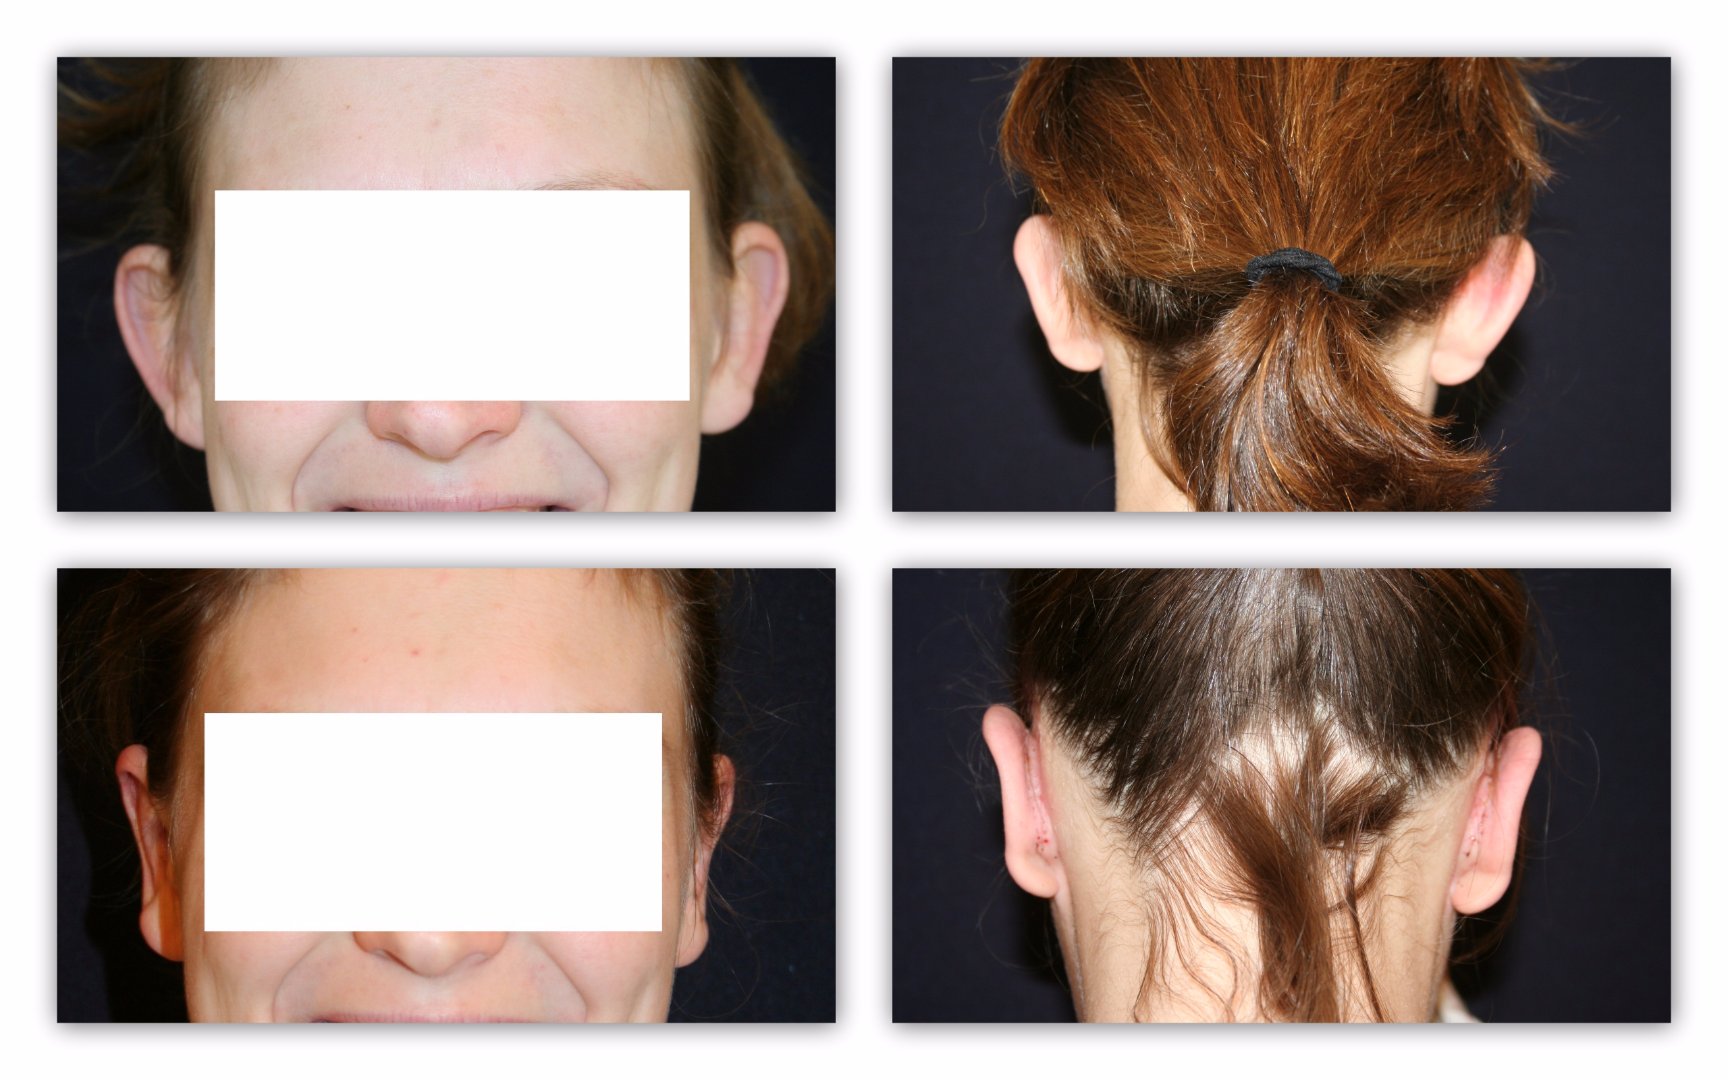 Ear correction before and after photos - Global Care ...